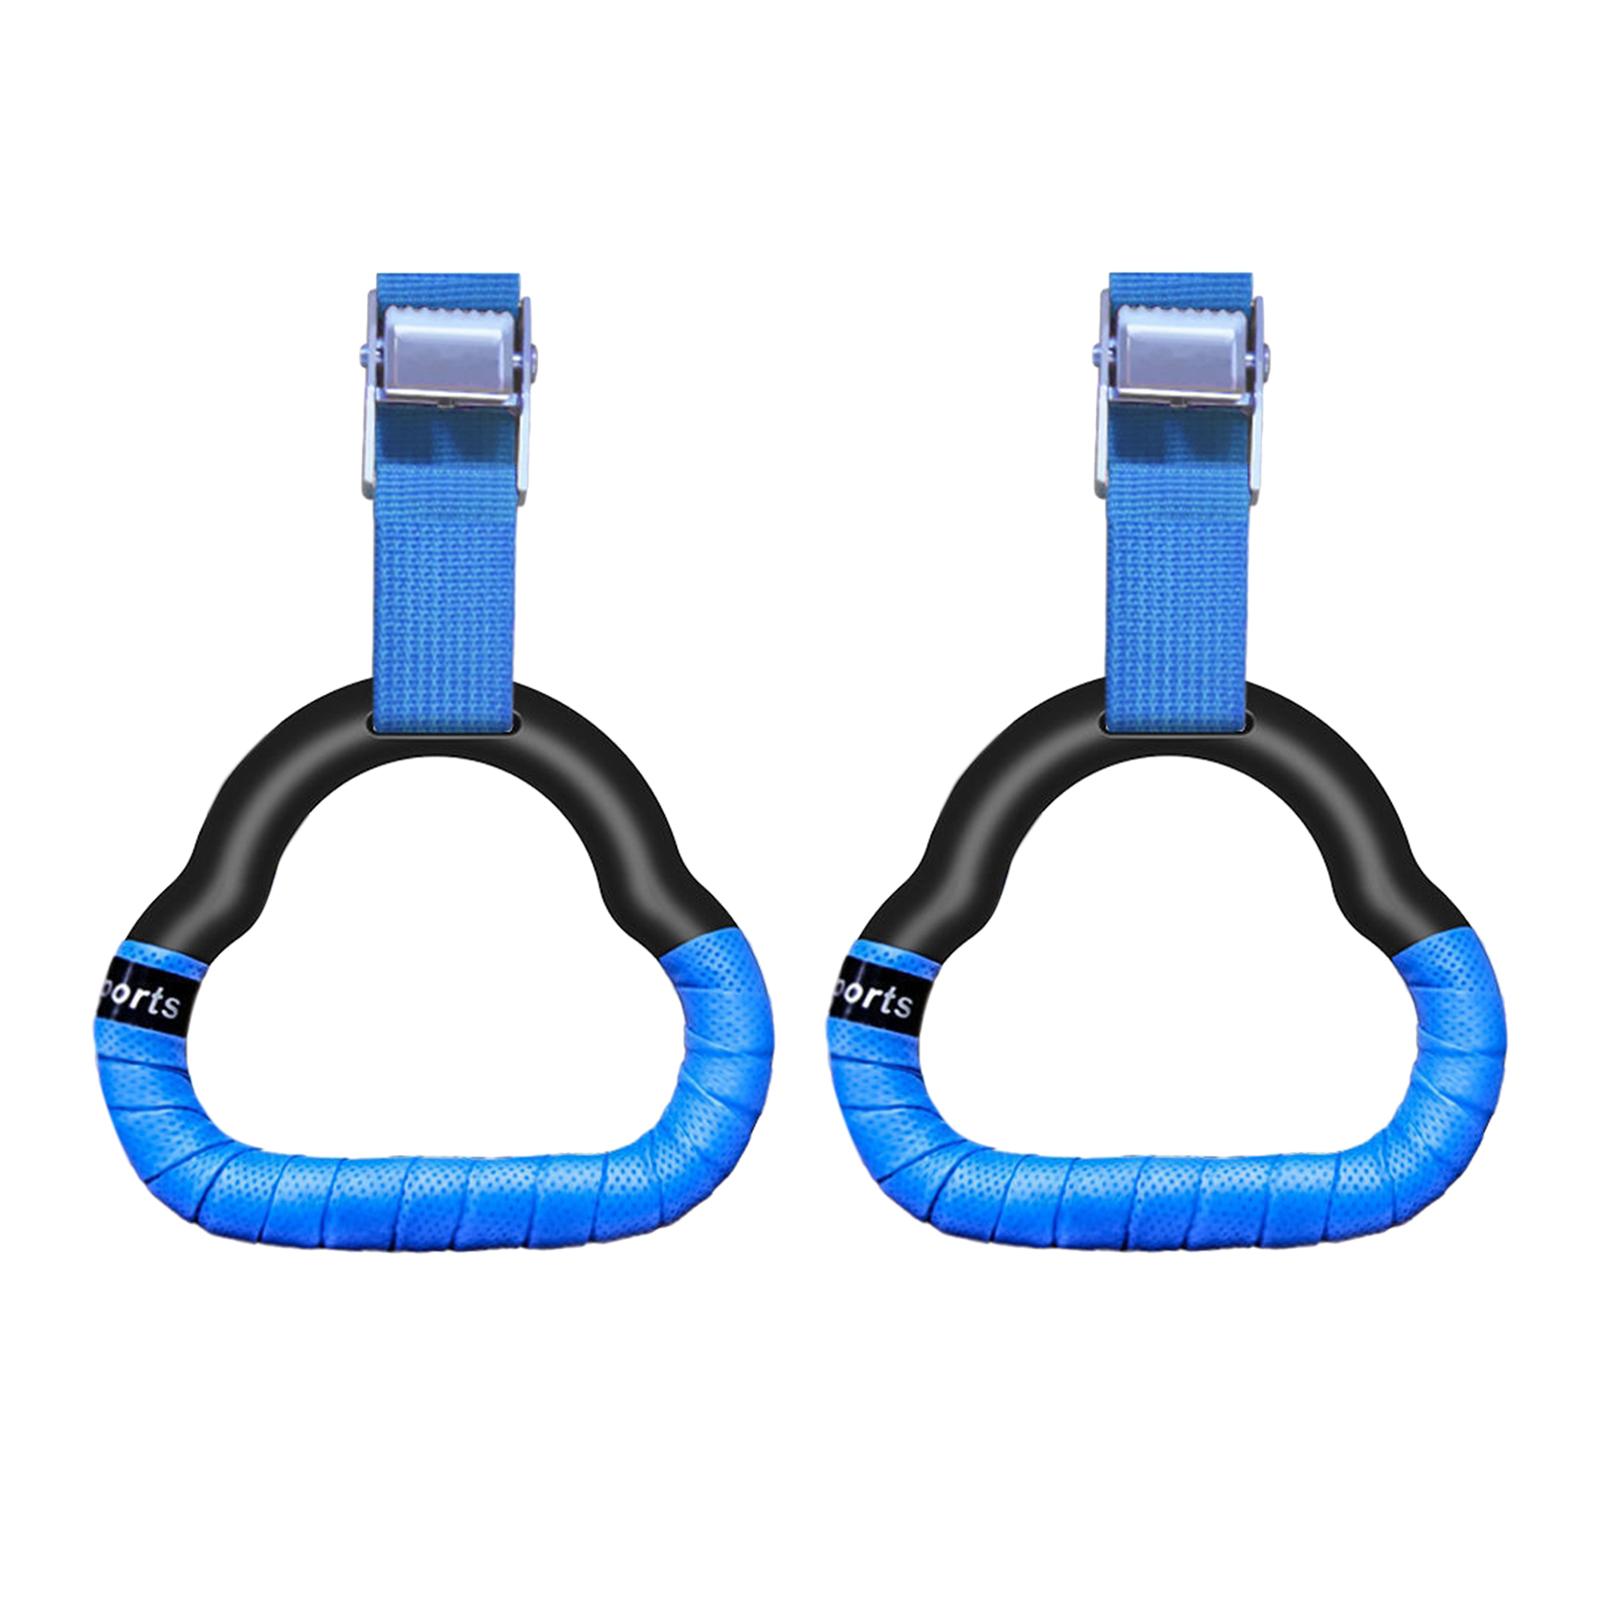 Gymnastics Rings Non Slip Home Gym Strength Training Workout Training Rings